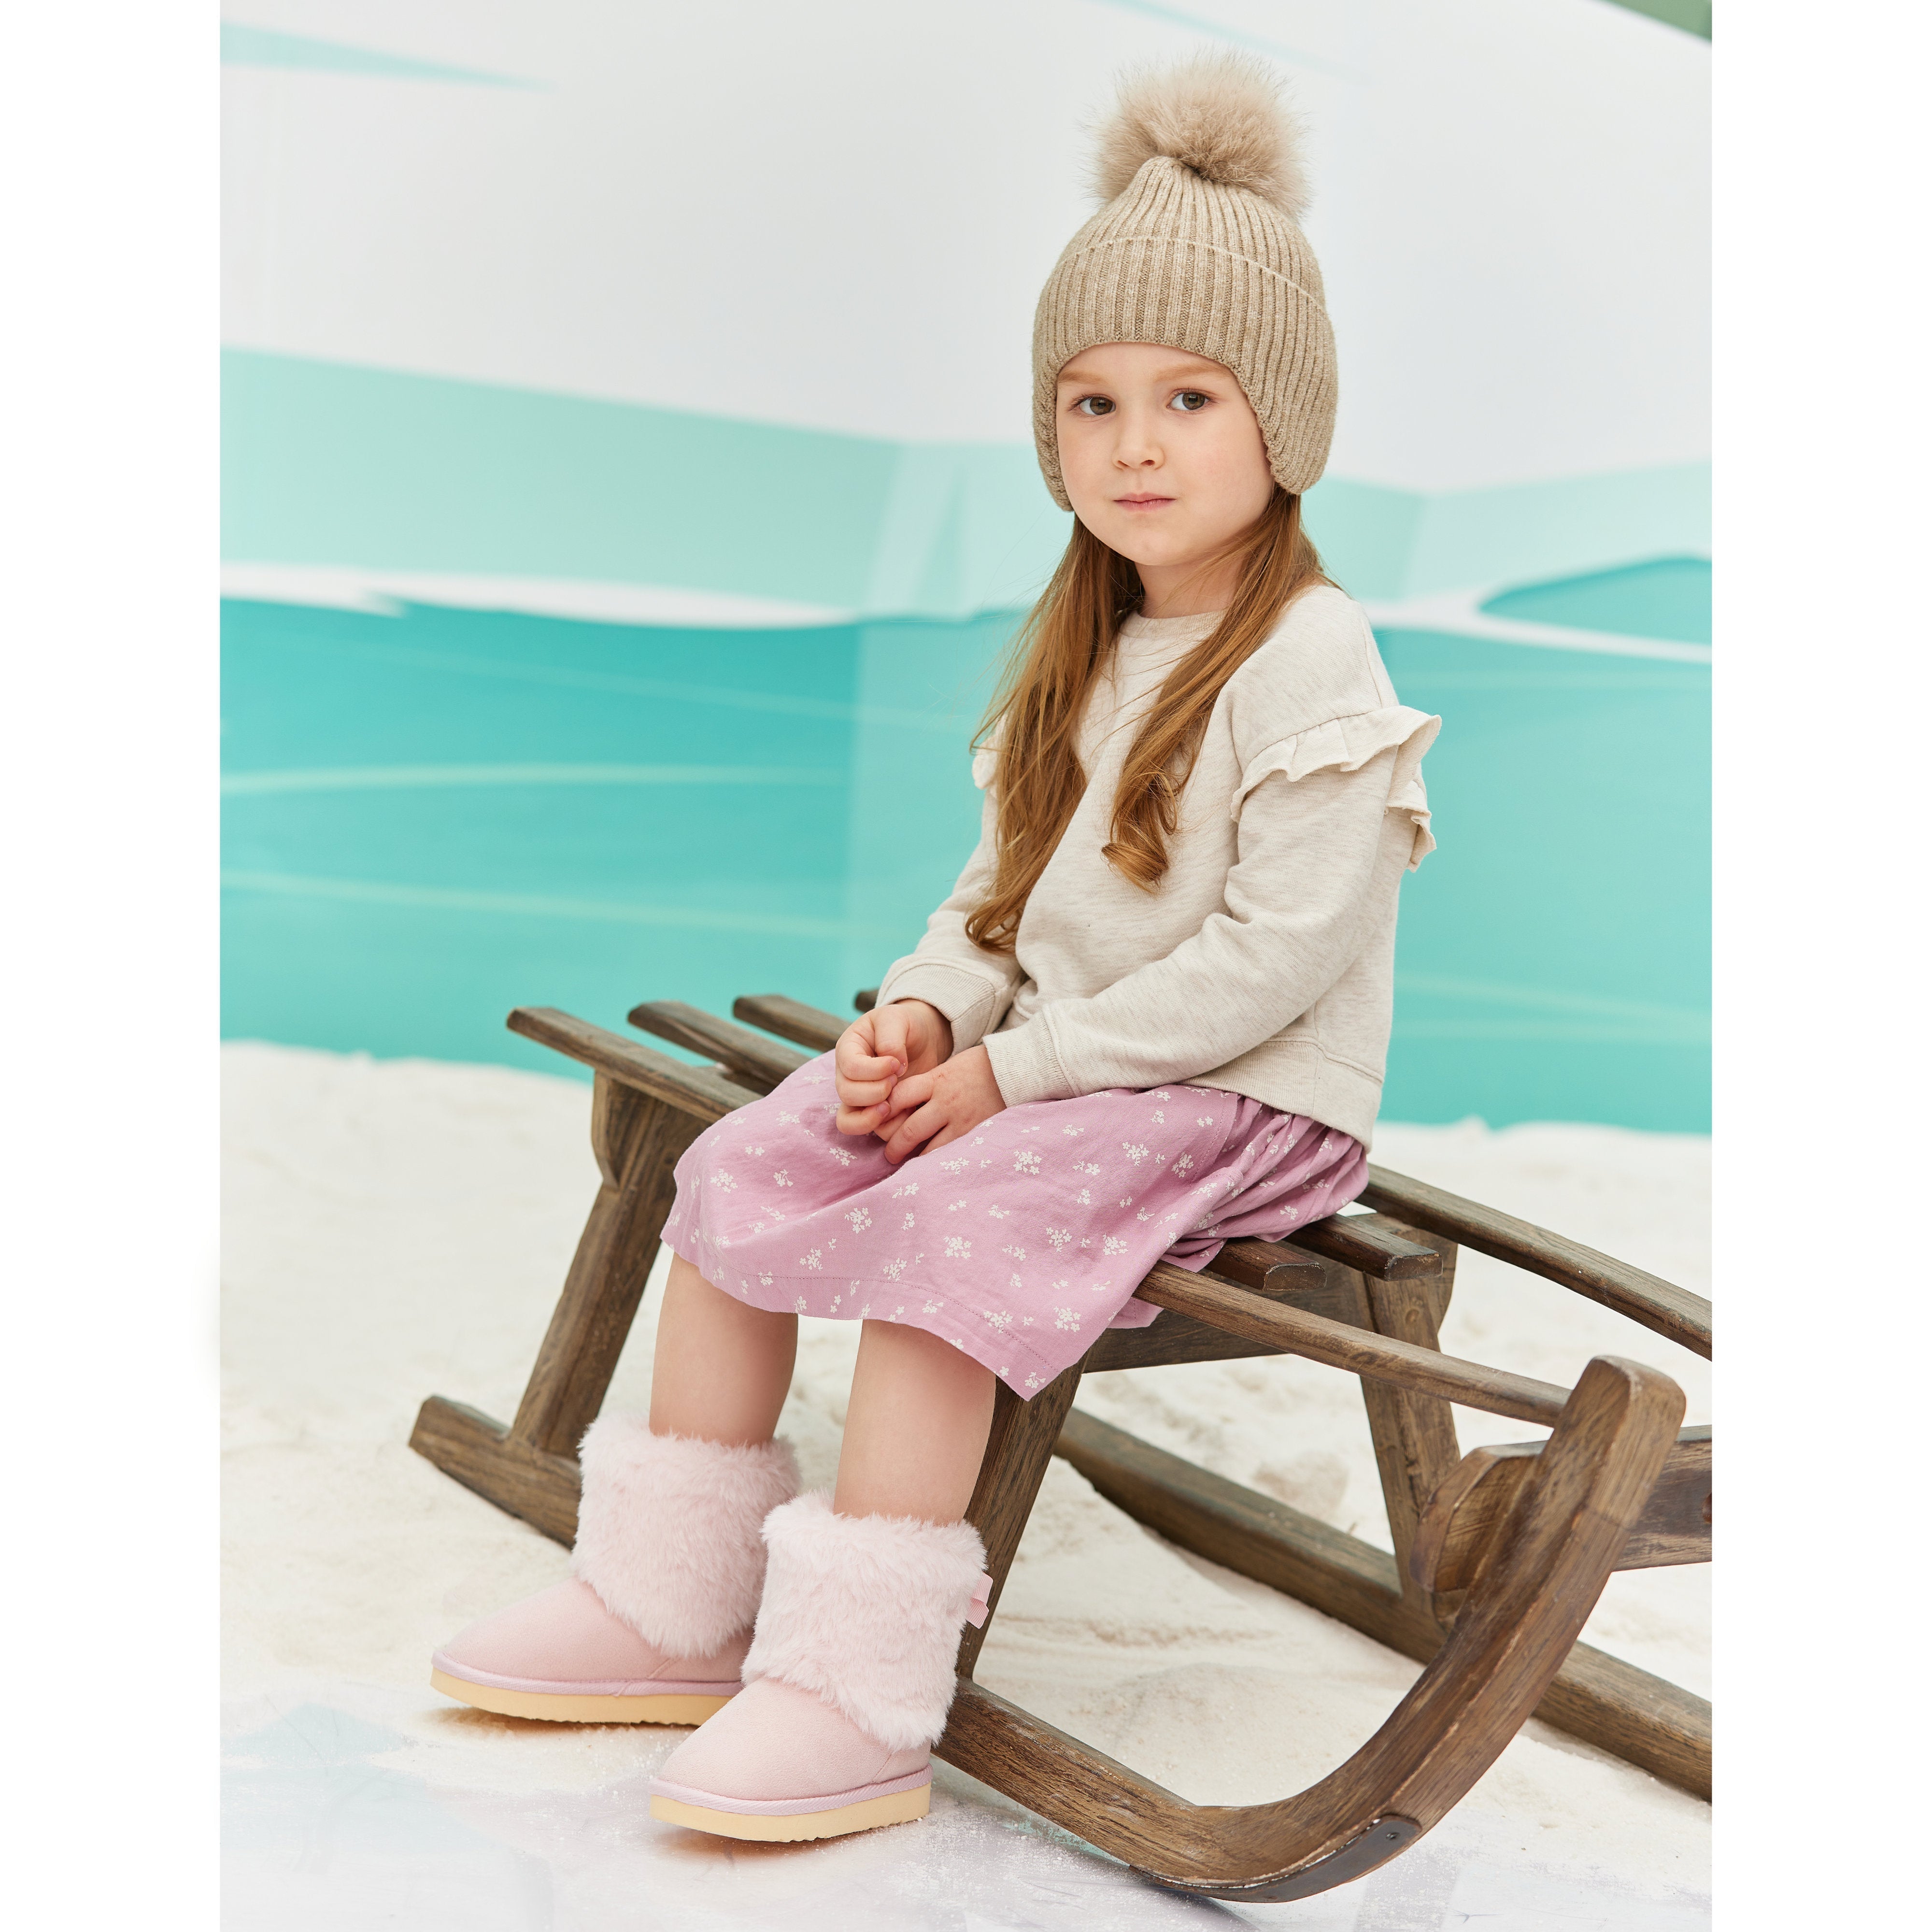 Toddler Little Kid Classic Furry Bow Snow Boots